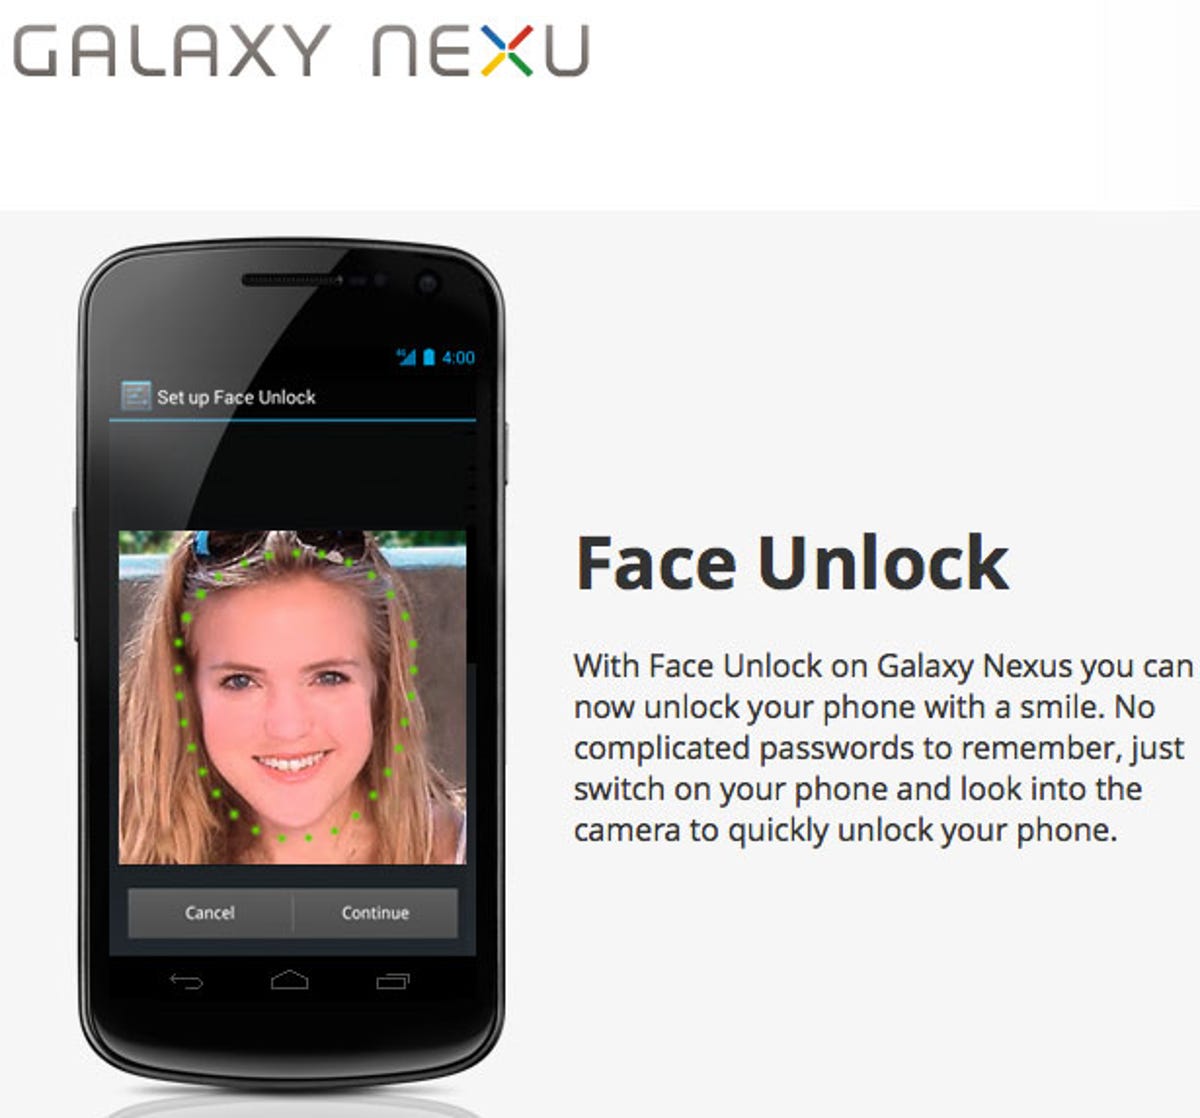 Oops! A short-lived version of Google's splashy Galaxy Nexus Web page showed the word 